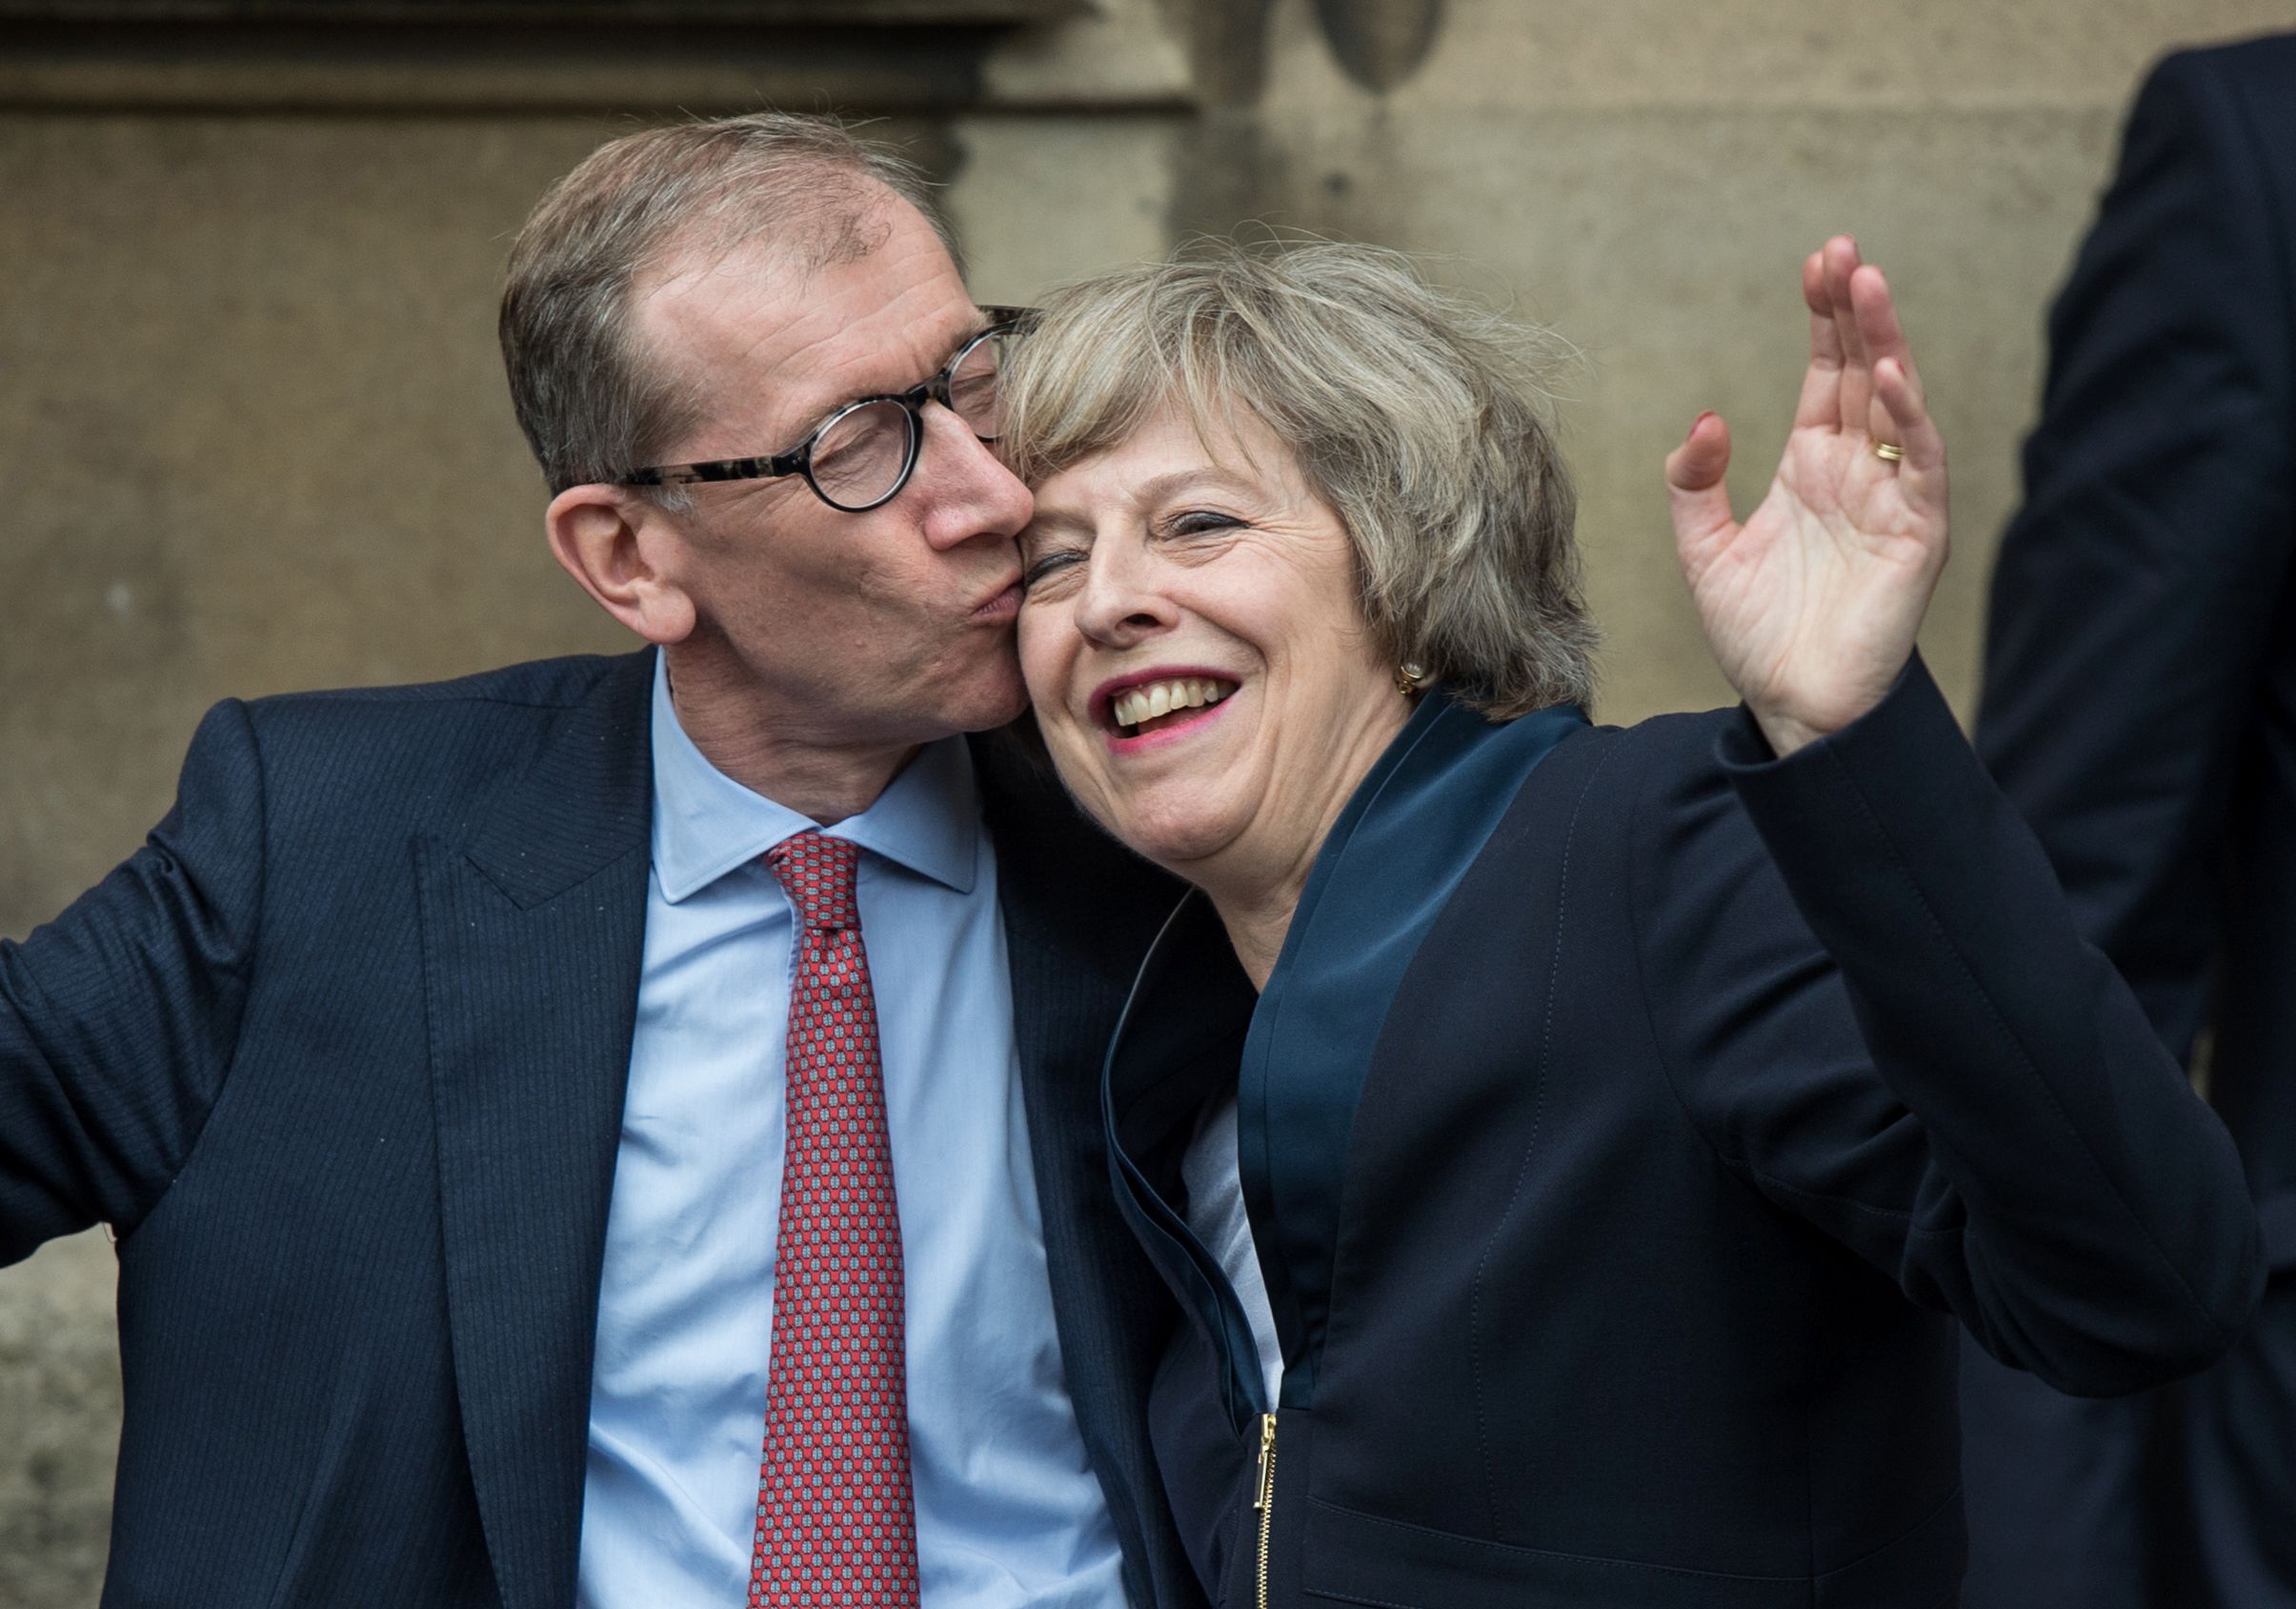 PHOTO: Theresa May receives a kiss from her husband Philip John May after speaking to members of the media at The St Stephen's entrance to the Palace of Westminster in London, July 11, 2016.